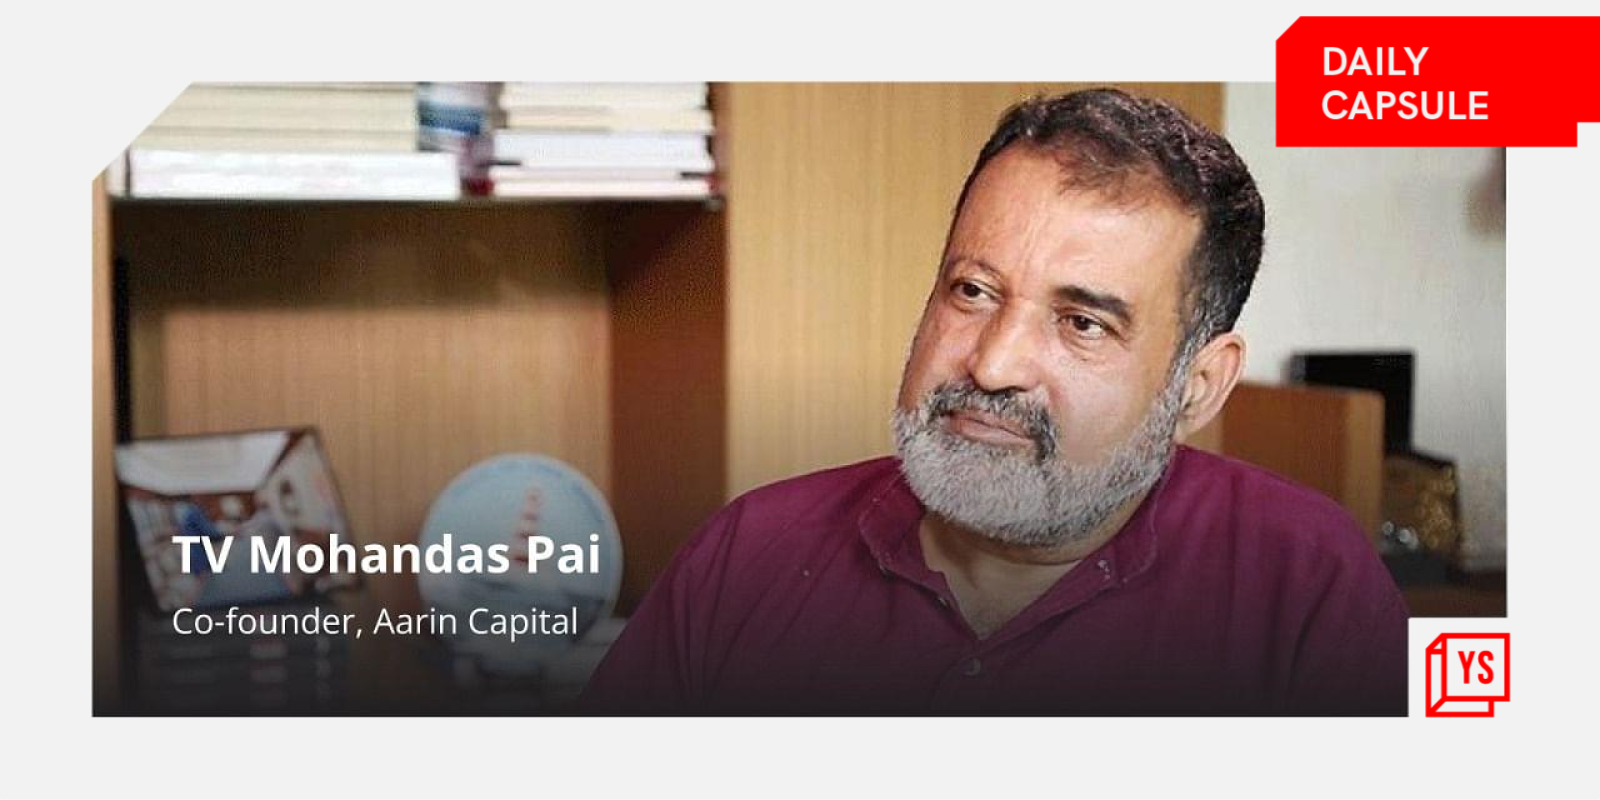 TV Mohandas Pai on why India’s startup boom is here to stay
